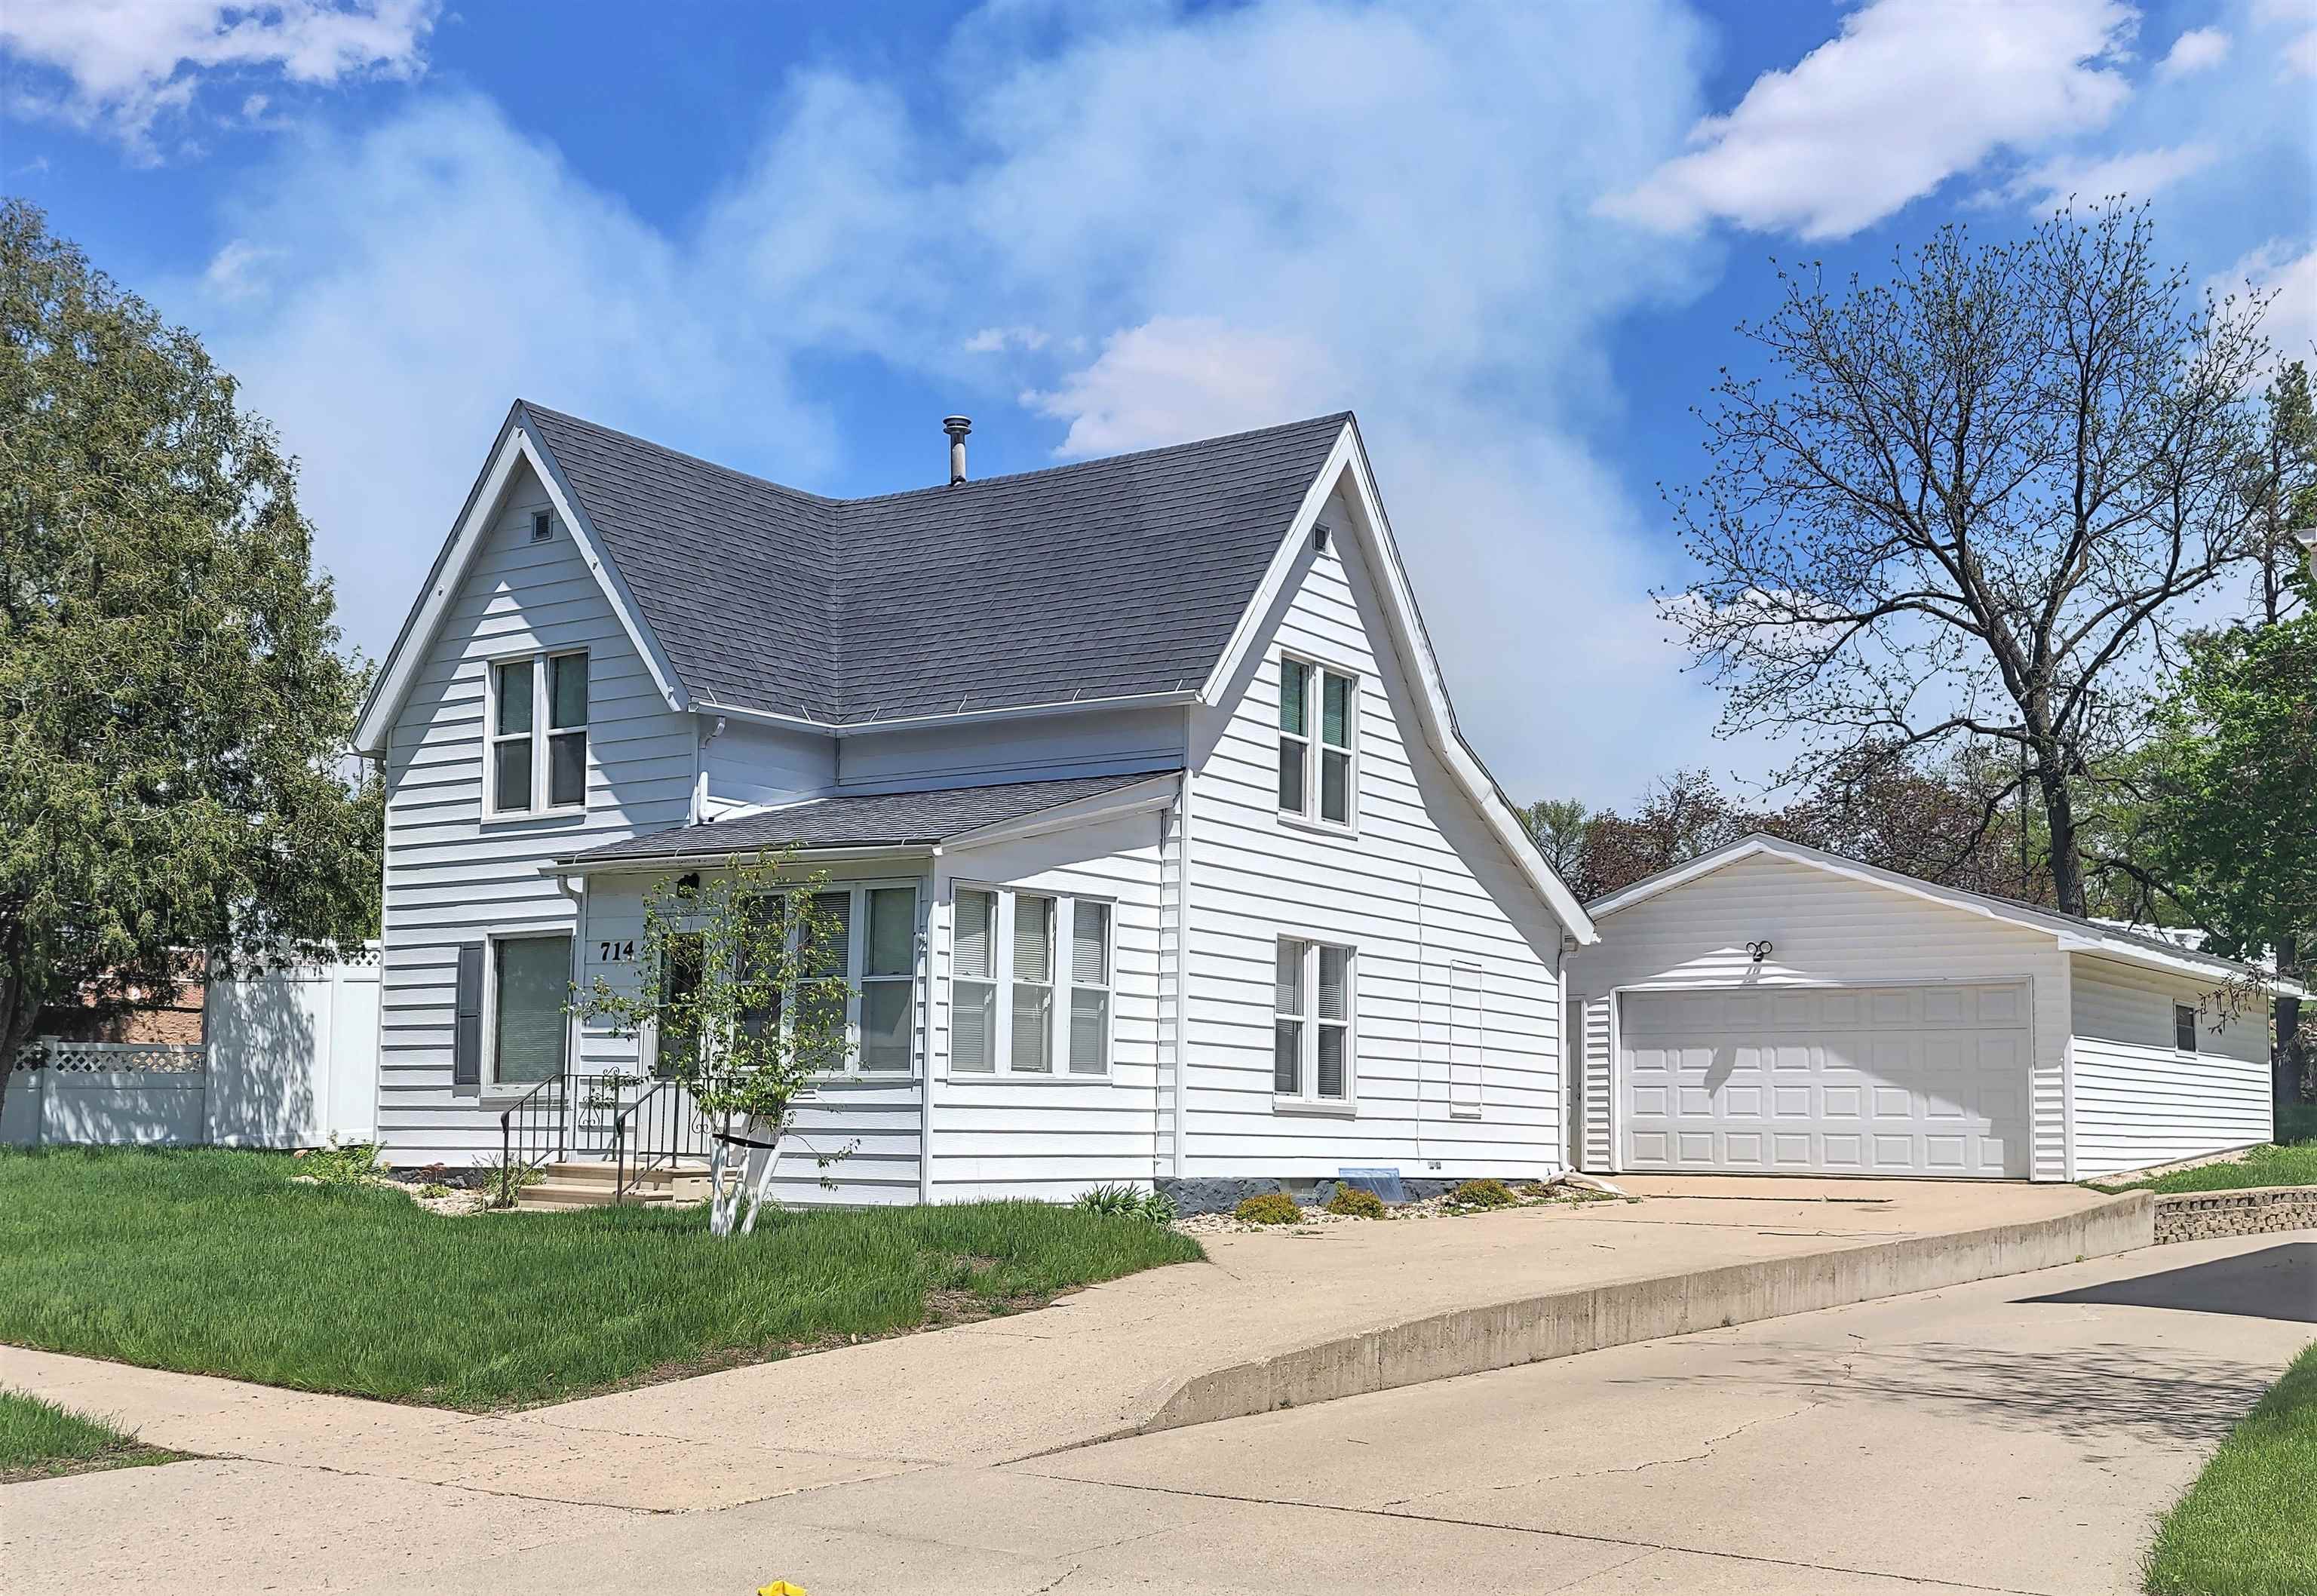 714 8th St., Estherville, IA 51334 